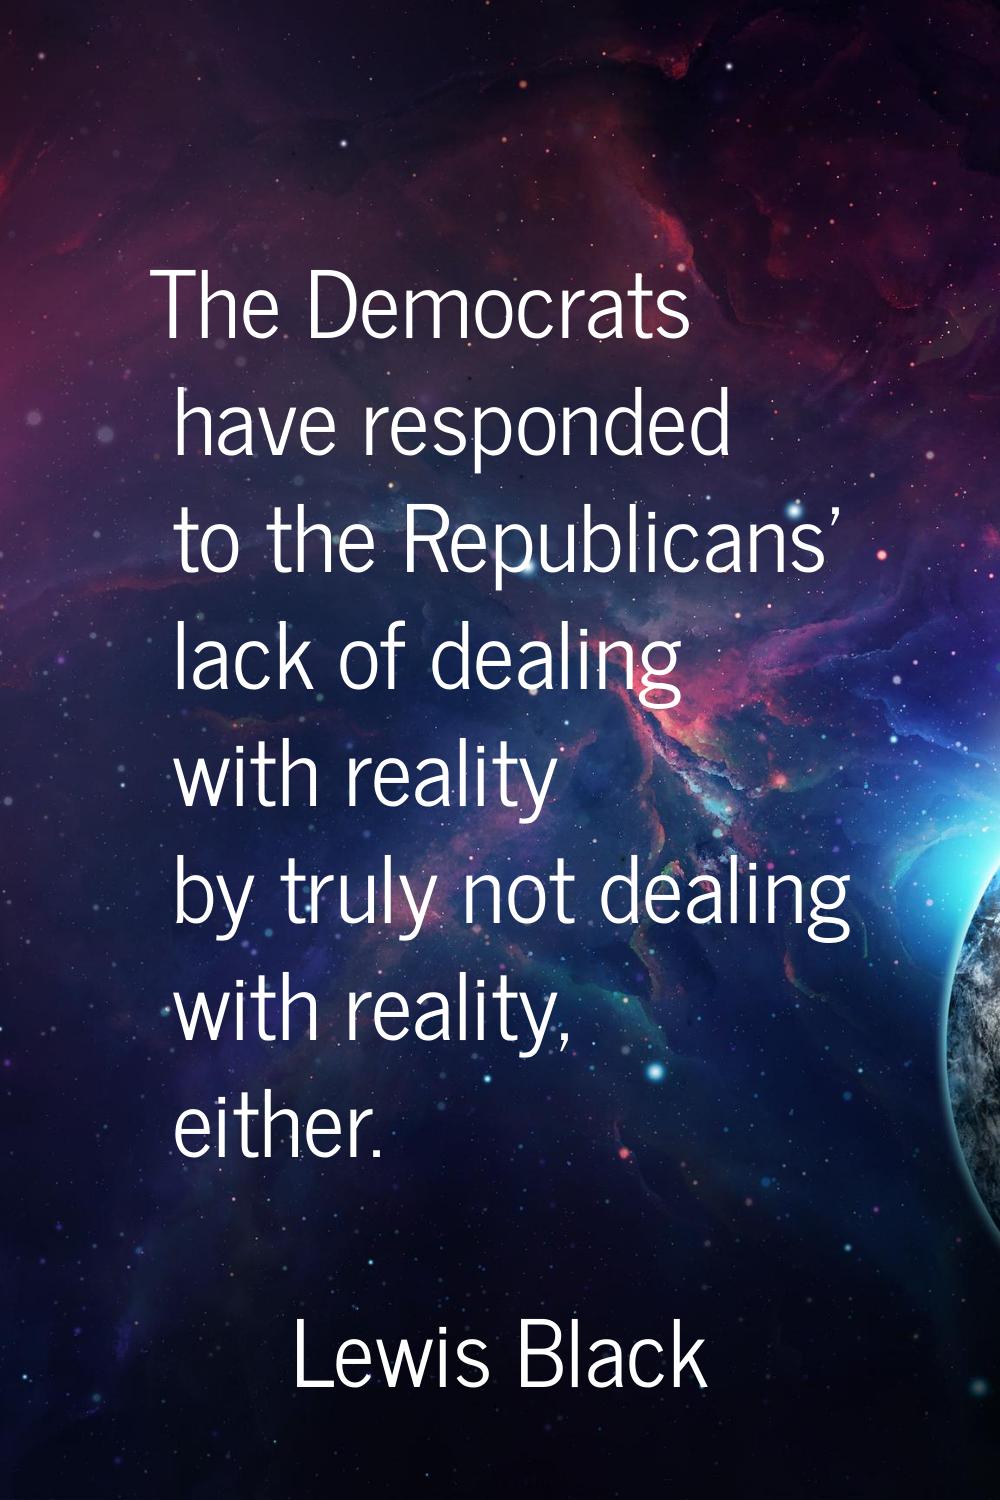 The Democrats have responded to the Republicans' lack of dealing with reality by truly not dealing 